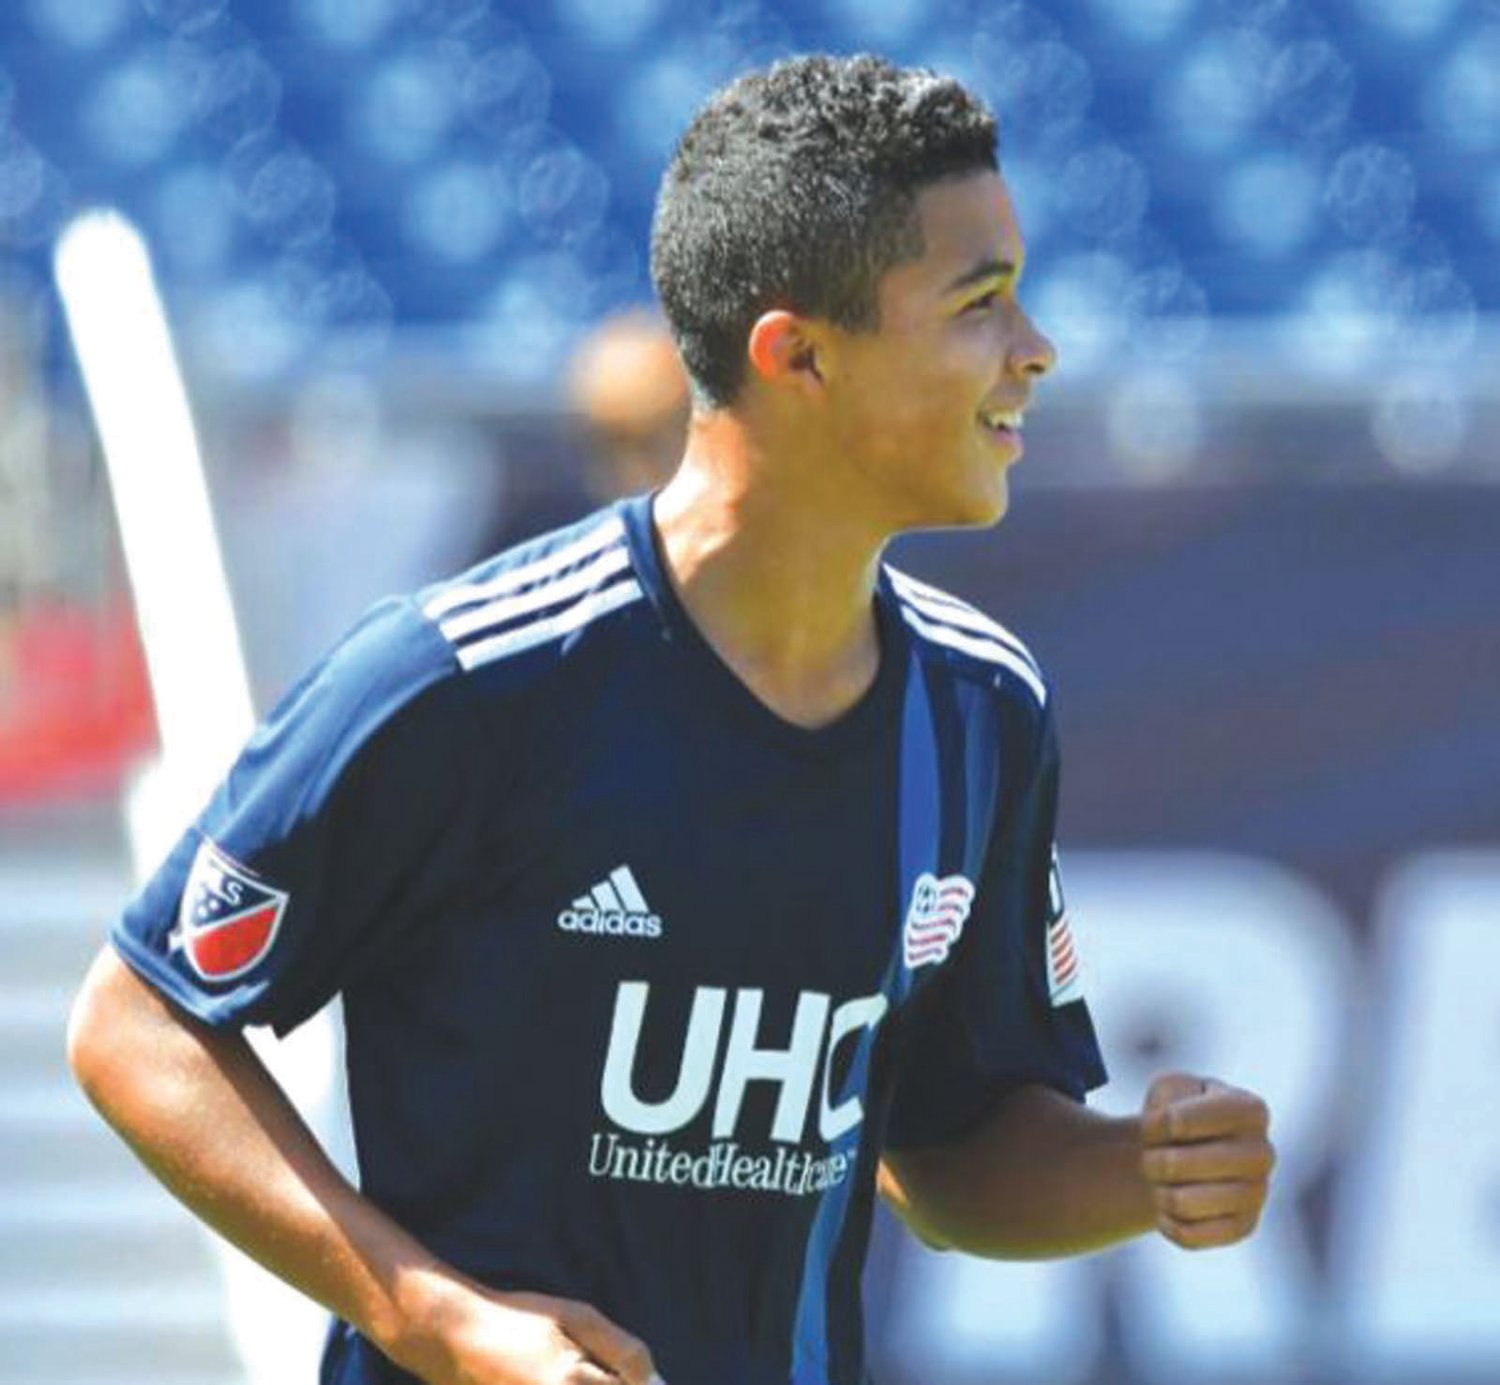 PLAYER OF THE WEEK: New England Revolution II player and Cranston native Damian Rivera. Rivera, who is currently in his second professional season, was recently named the league’s Player of the Week.